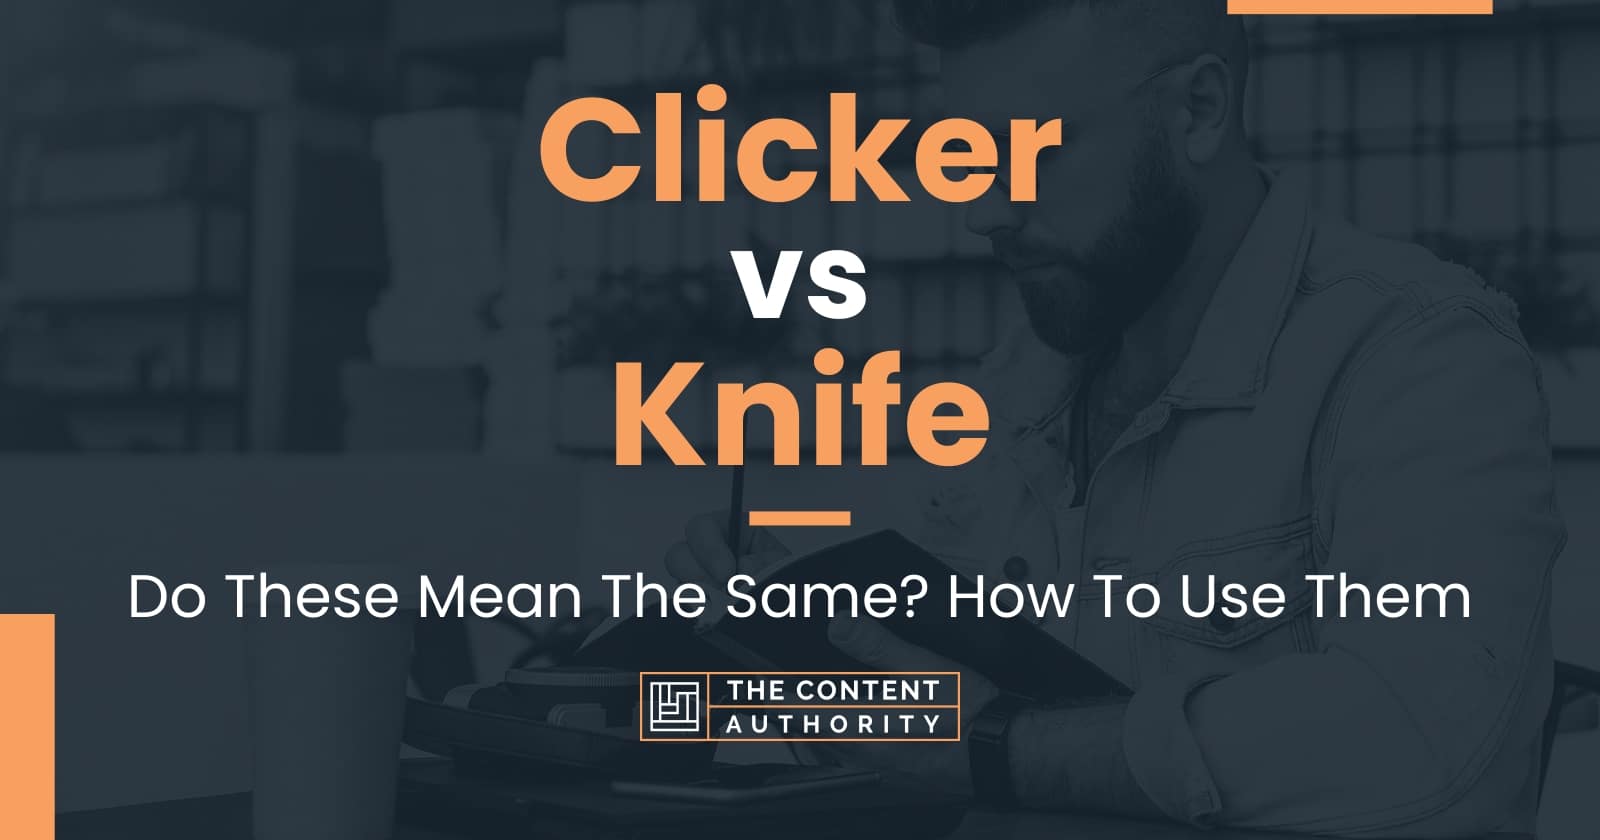 Clicker vs Knife: Do These Mean The Same? How To Use Them